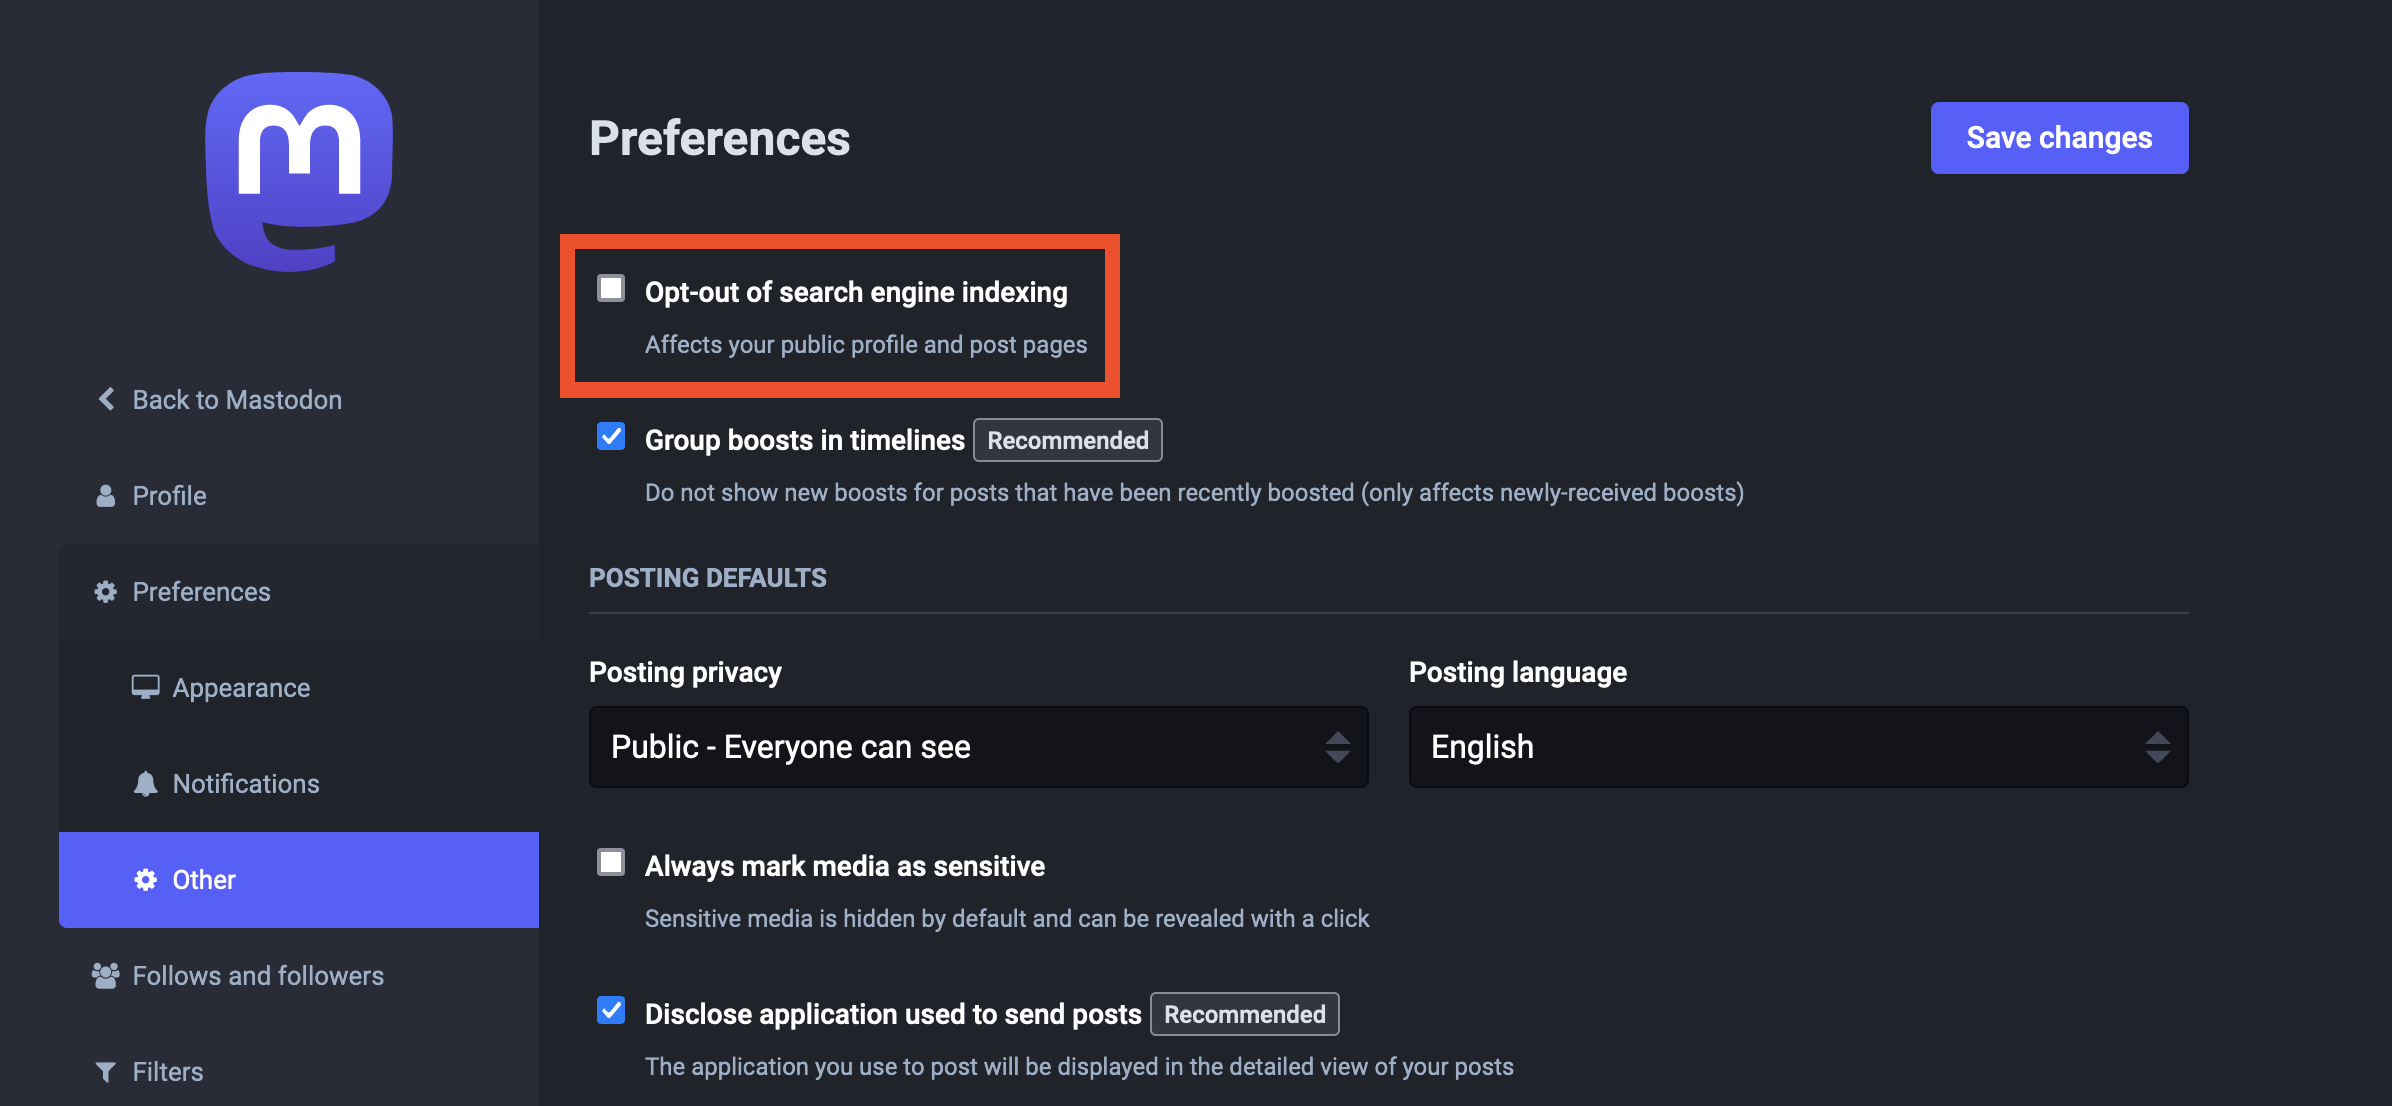 Screenshot of the Mastodon Preferences page showing the Opt-out of search engine indexing checkbox